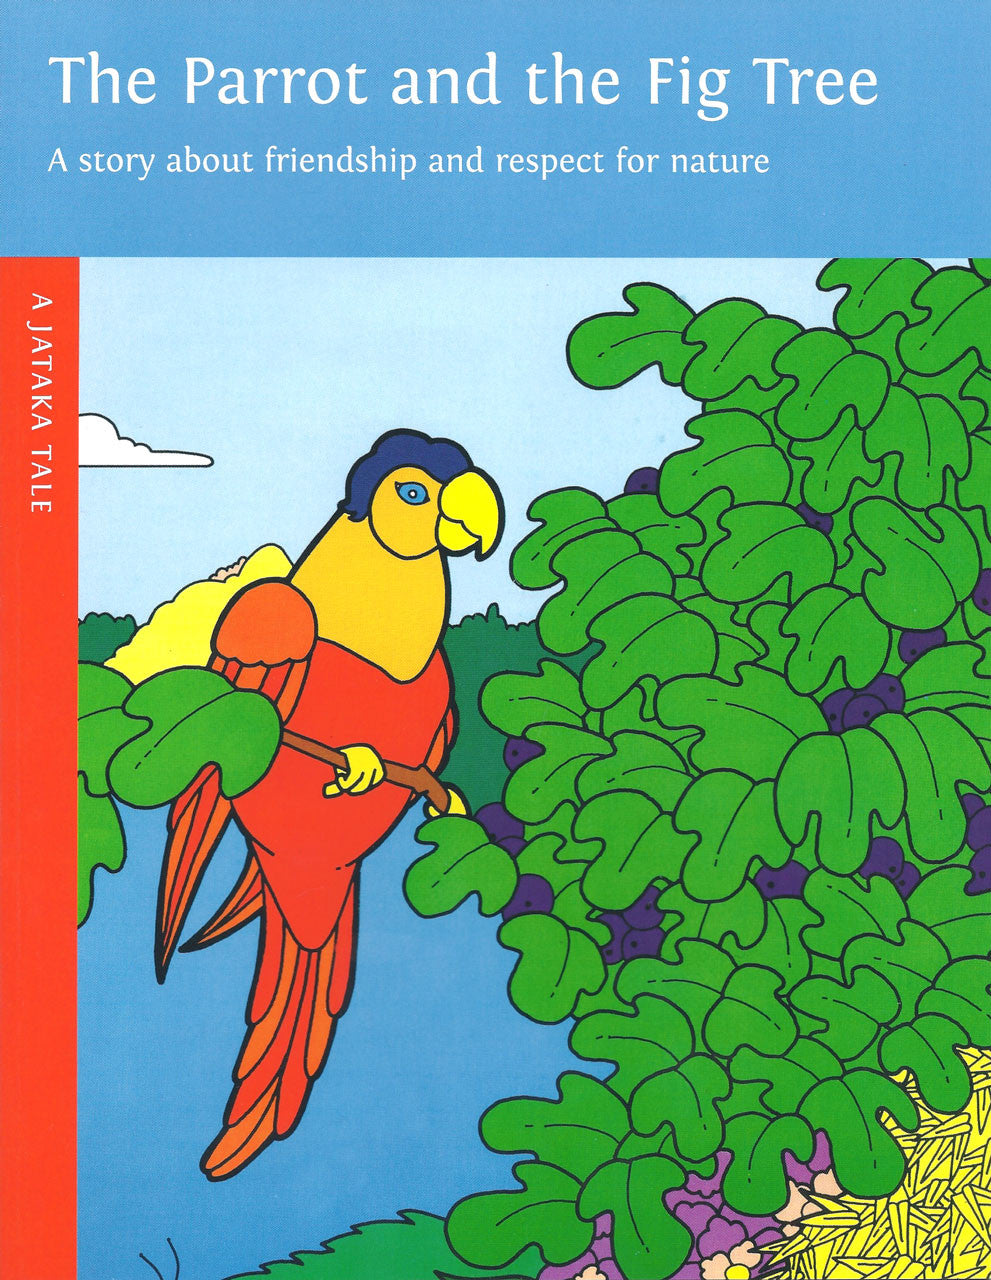 The Parrot and the Fig Tree: Friendship and Respect for Nature. A Jataka Tale, illustrated by Michael Harman